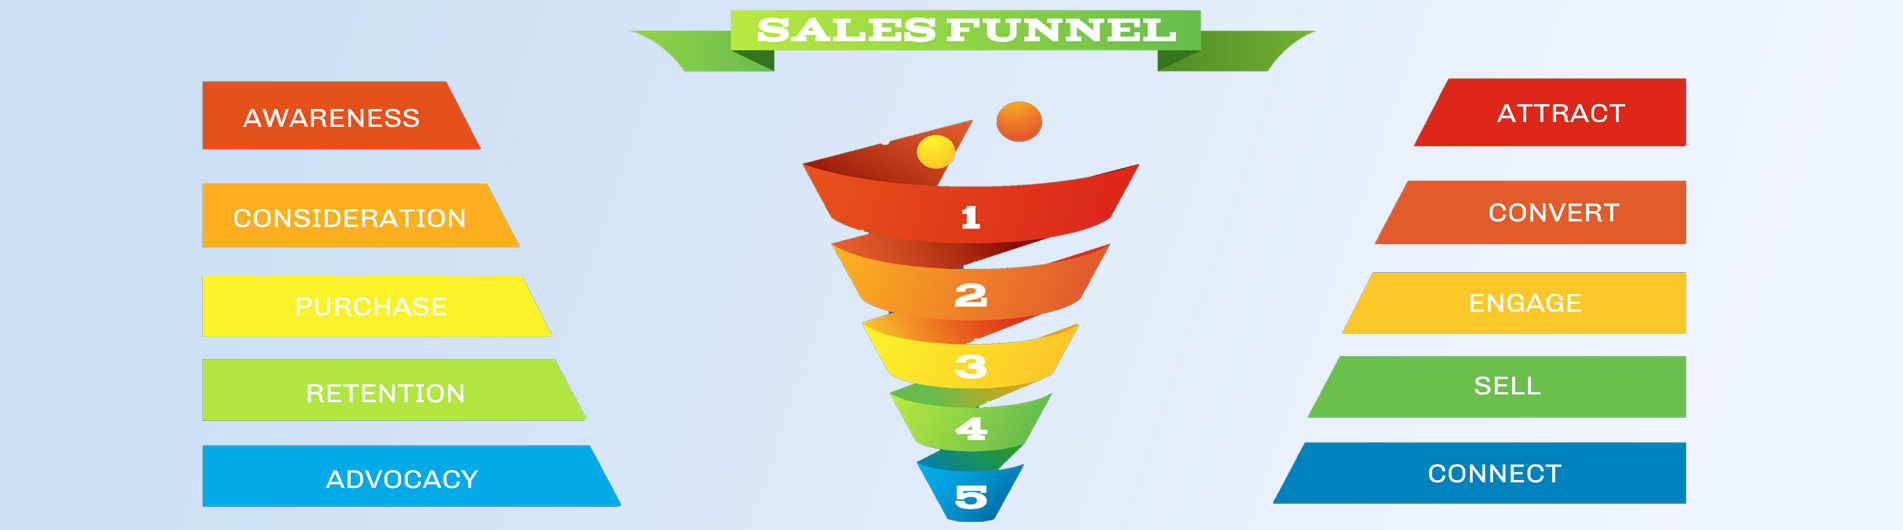 How SEO Supports Sales Funnel Stages